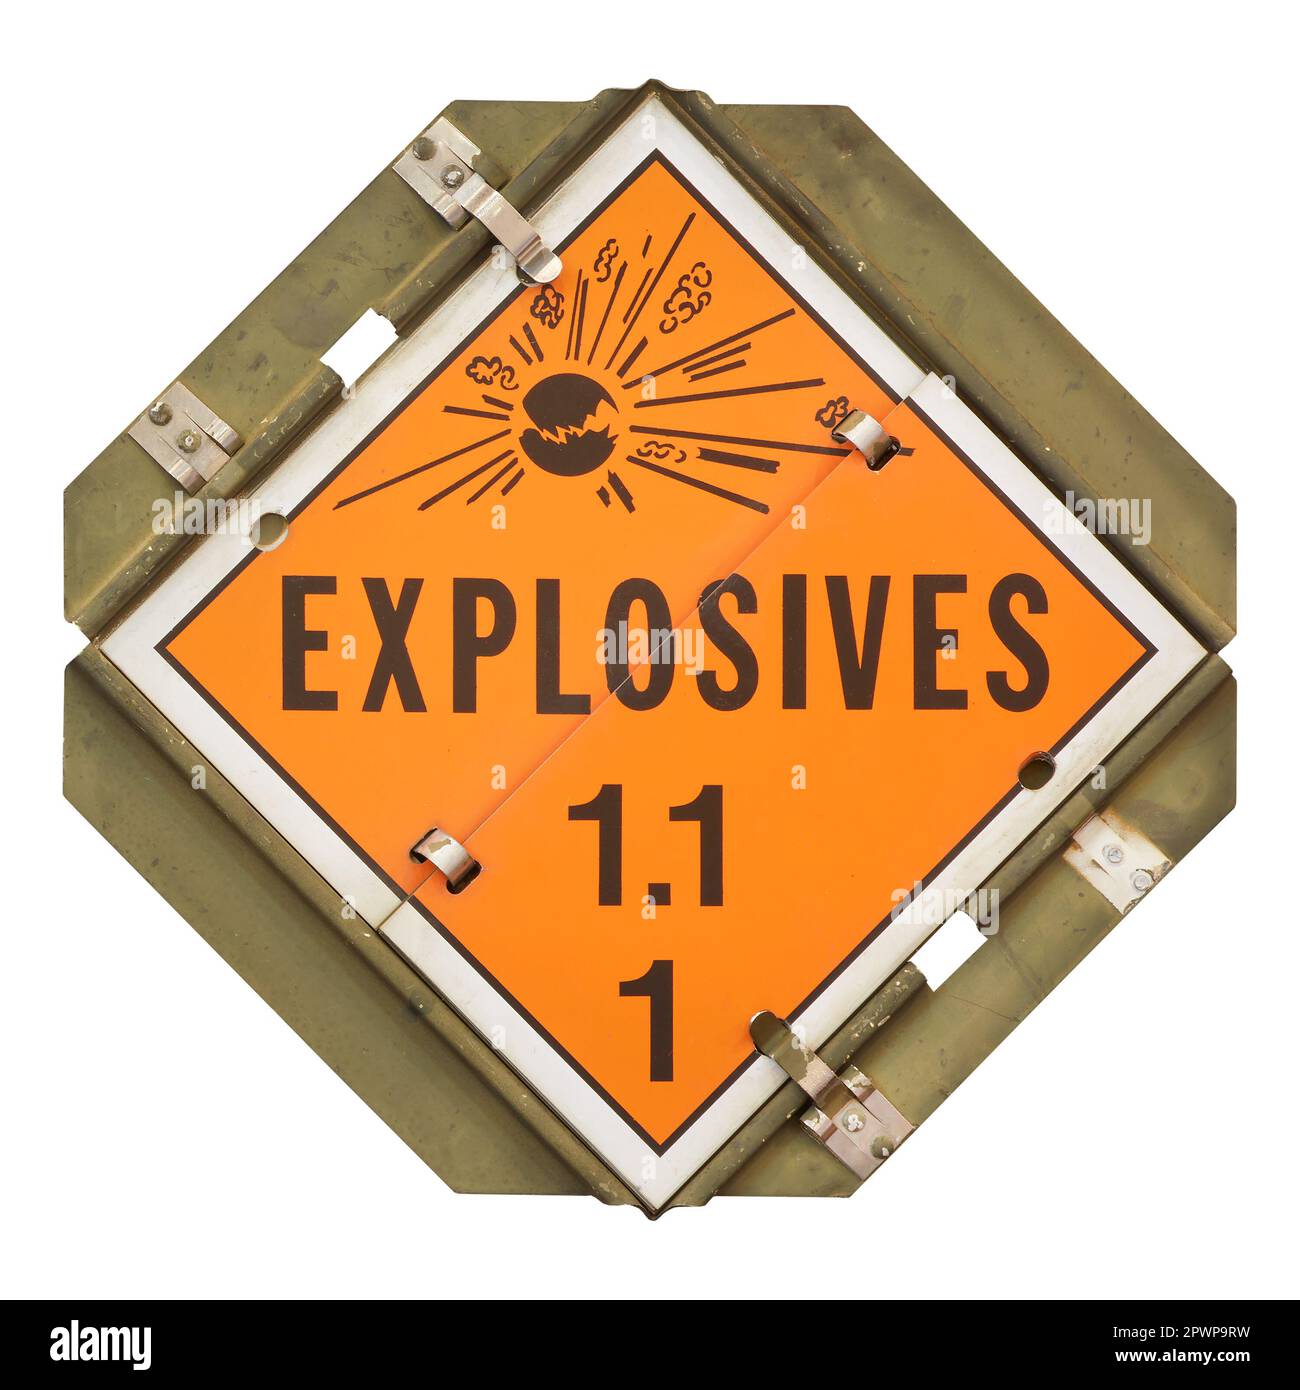 Metal explosives sign with orange warning label isolated on a white background Stock Photo